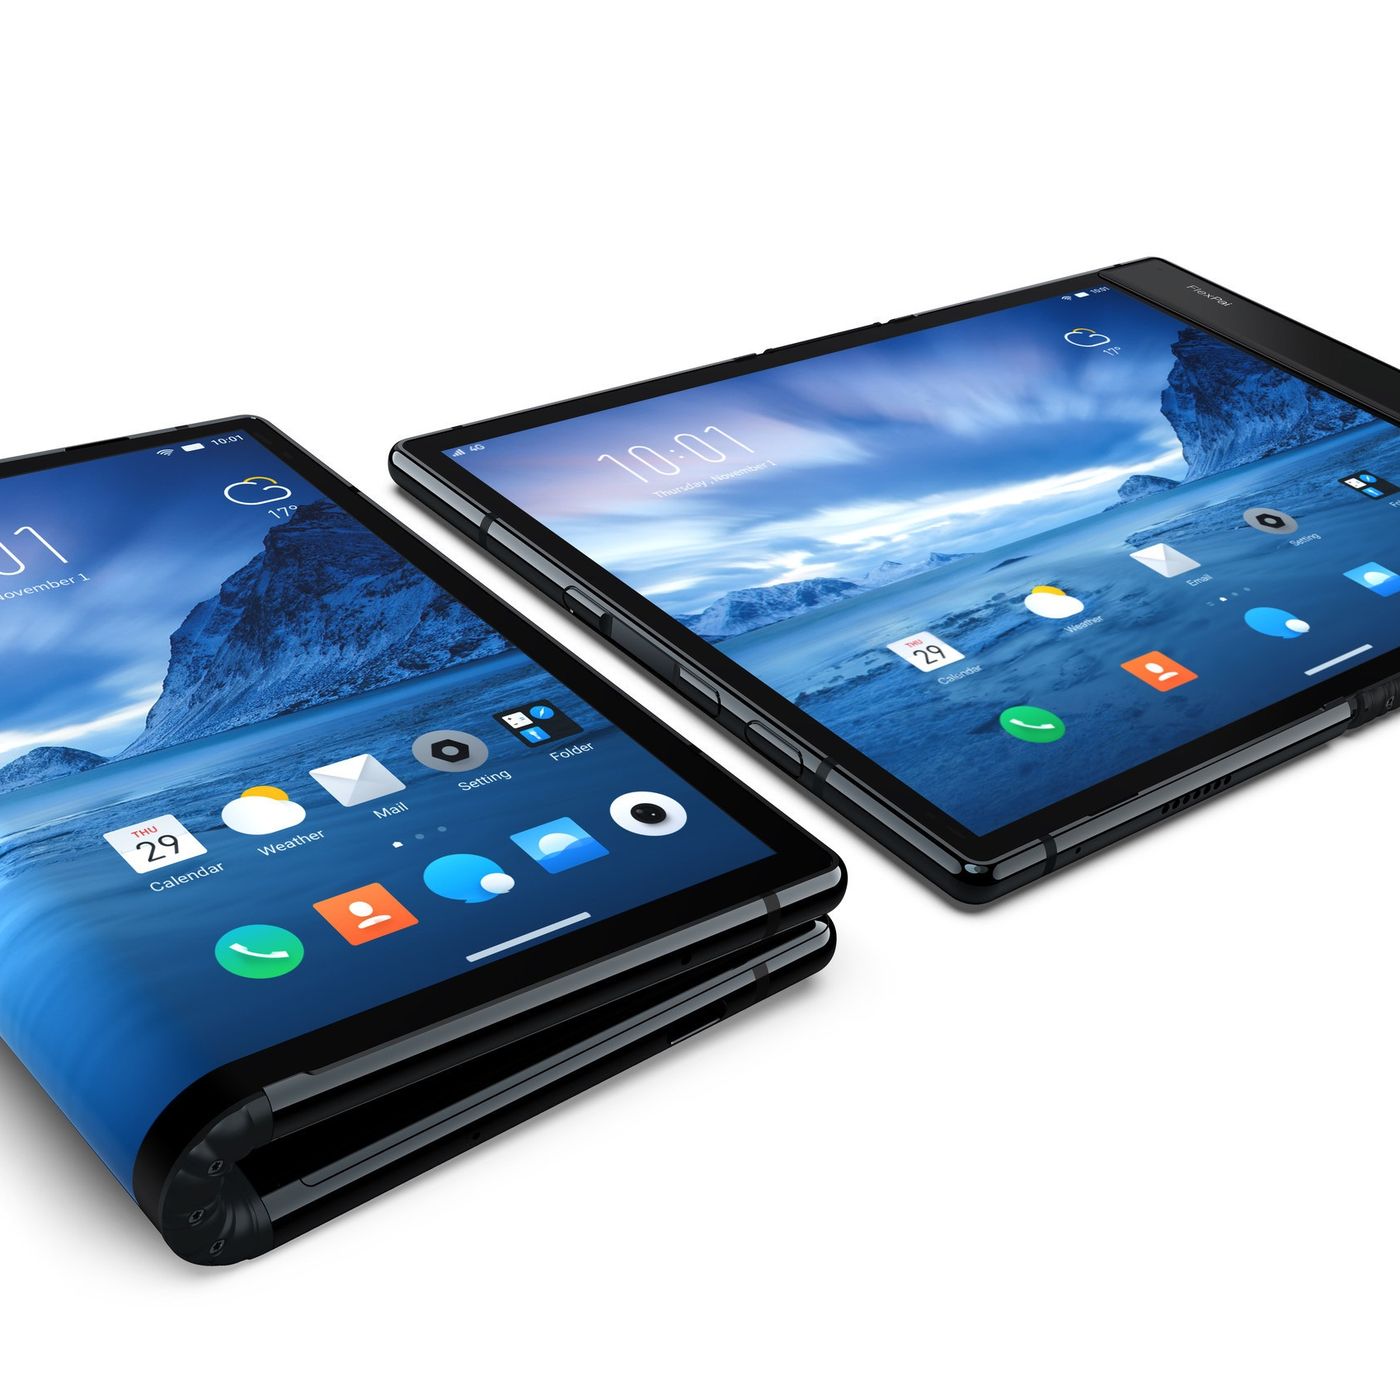 Foldable Phones are finally here filled with excitement, massive trade-offs, and unfortunate compromises